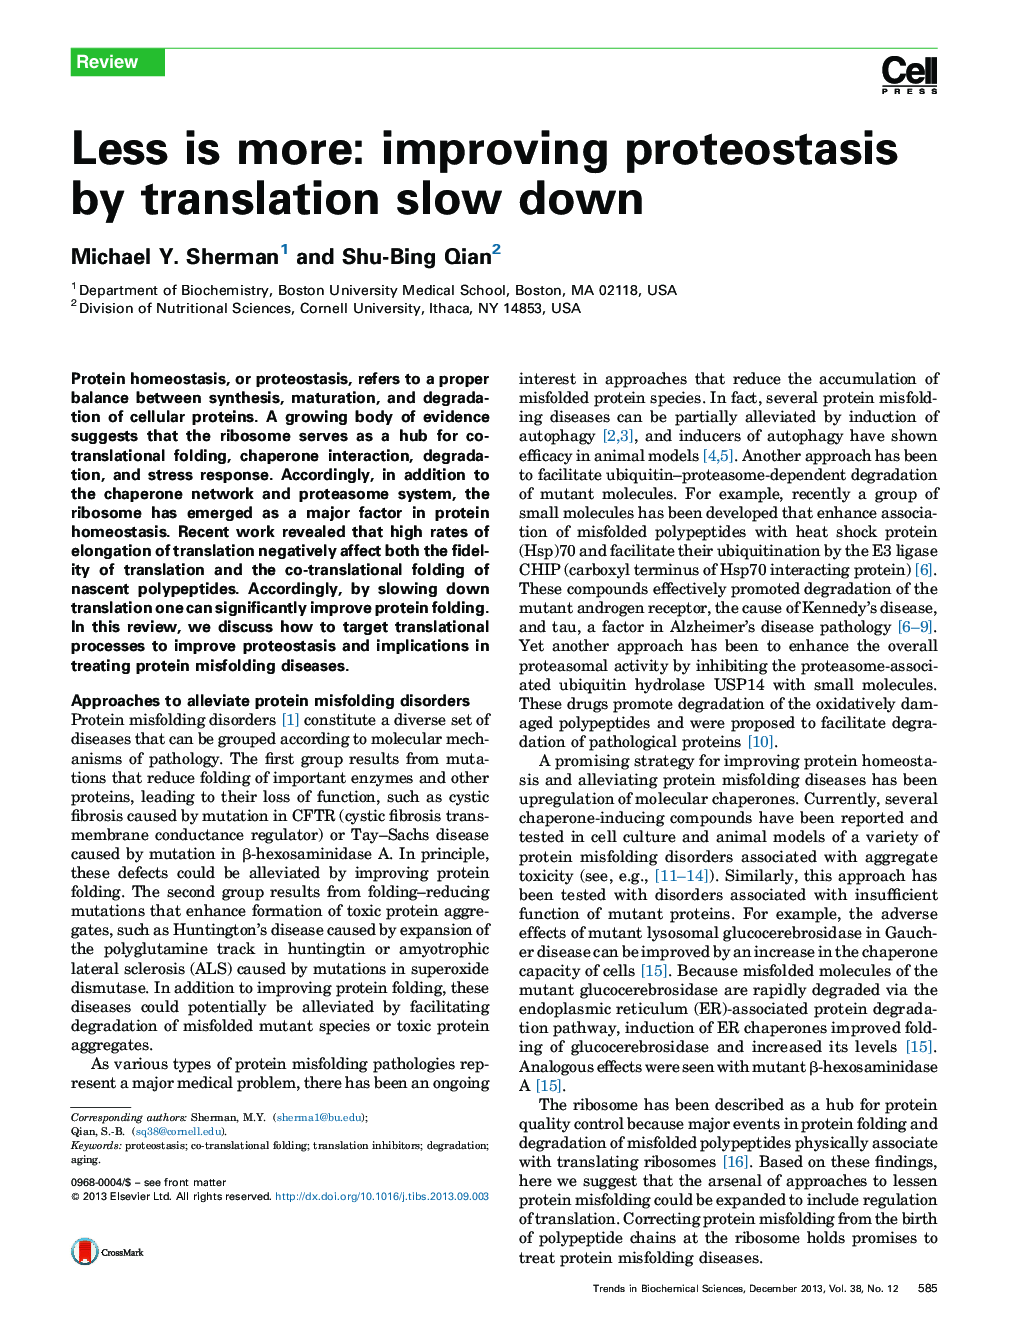 Less is more: improving proteostasis by translation slow down